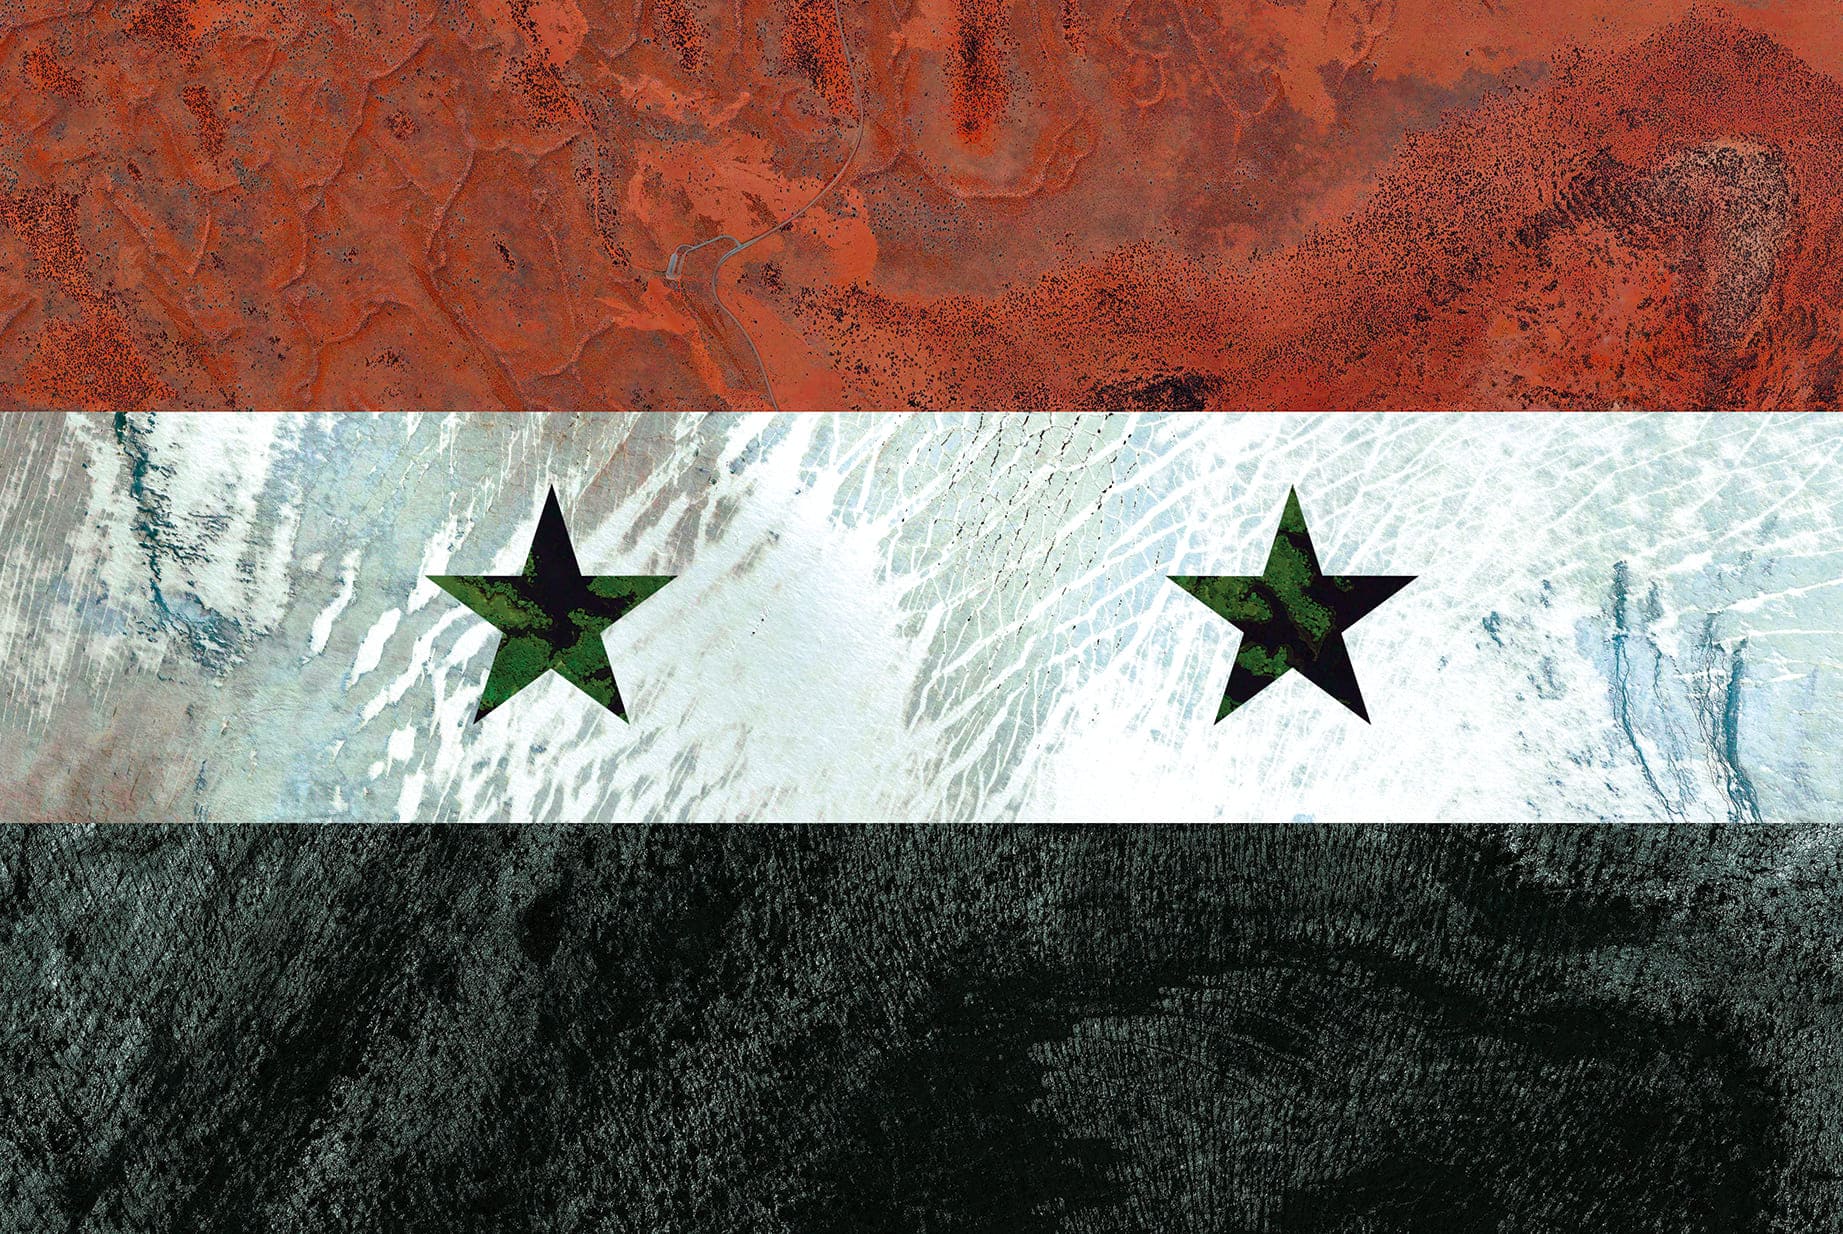 SIRYA EARTH FLAG, 2016, DIGITAL COLLAGE OF SATELLITE PHOTOGRAPHY FROM AUSTRALIA, GREENLAND, BRAZIL, ICELAND, diasec print CM 67×100, edition of 9